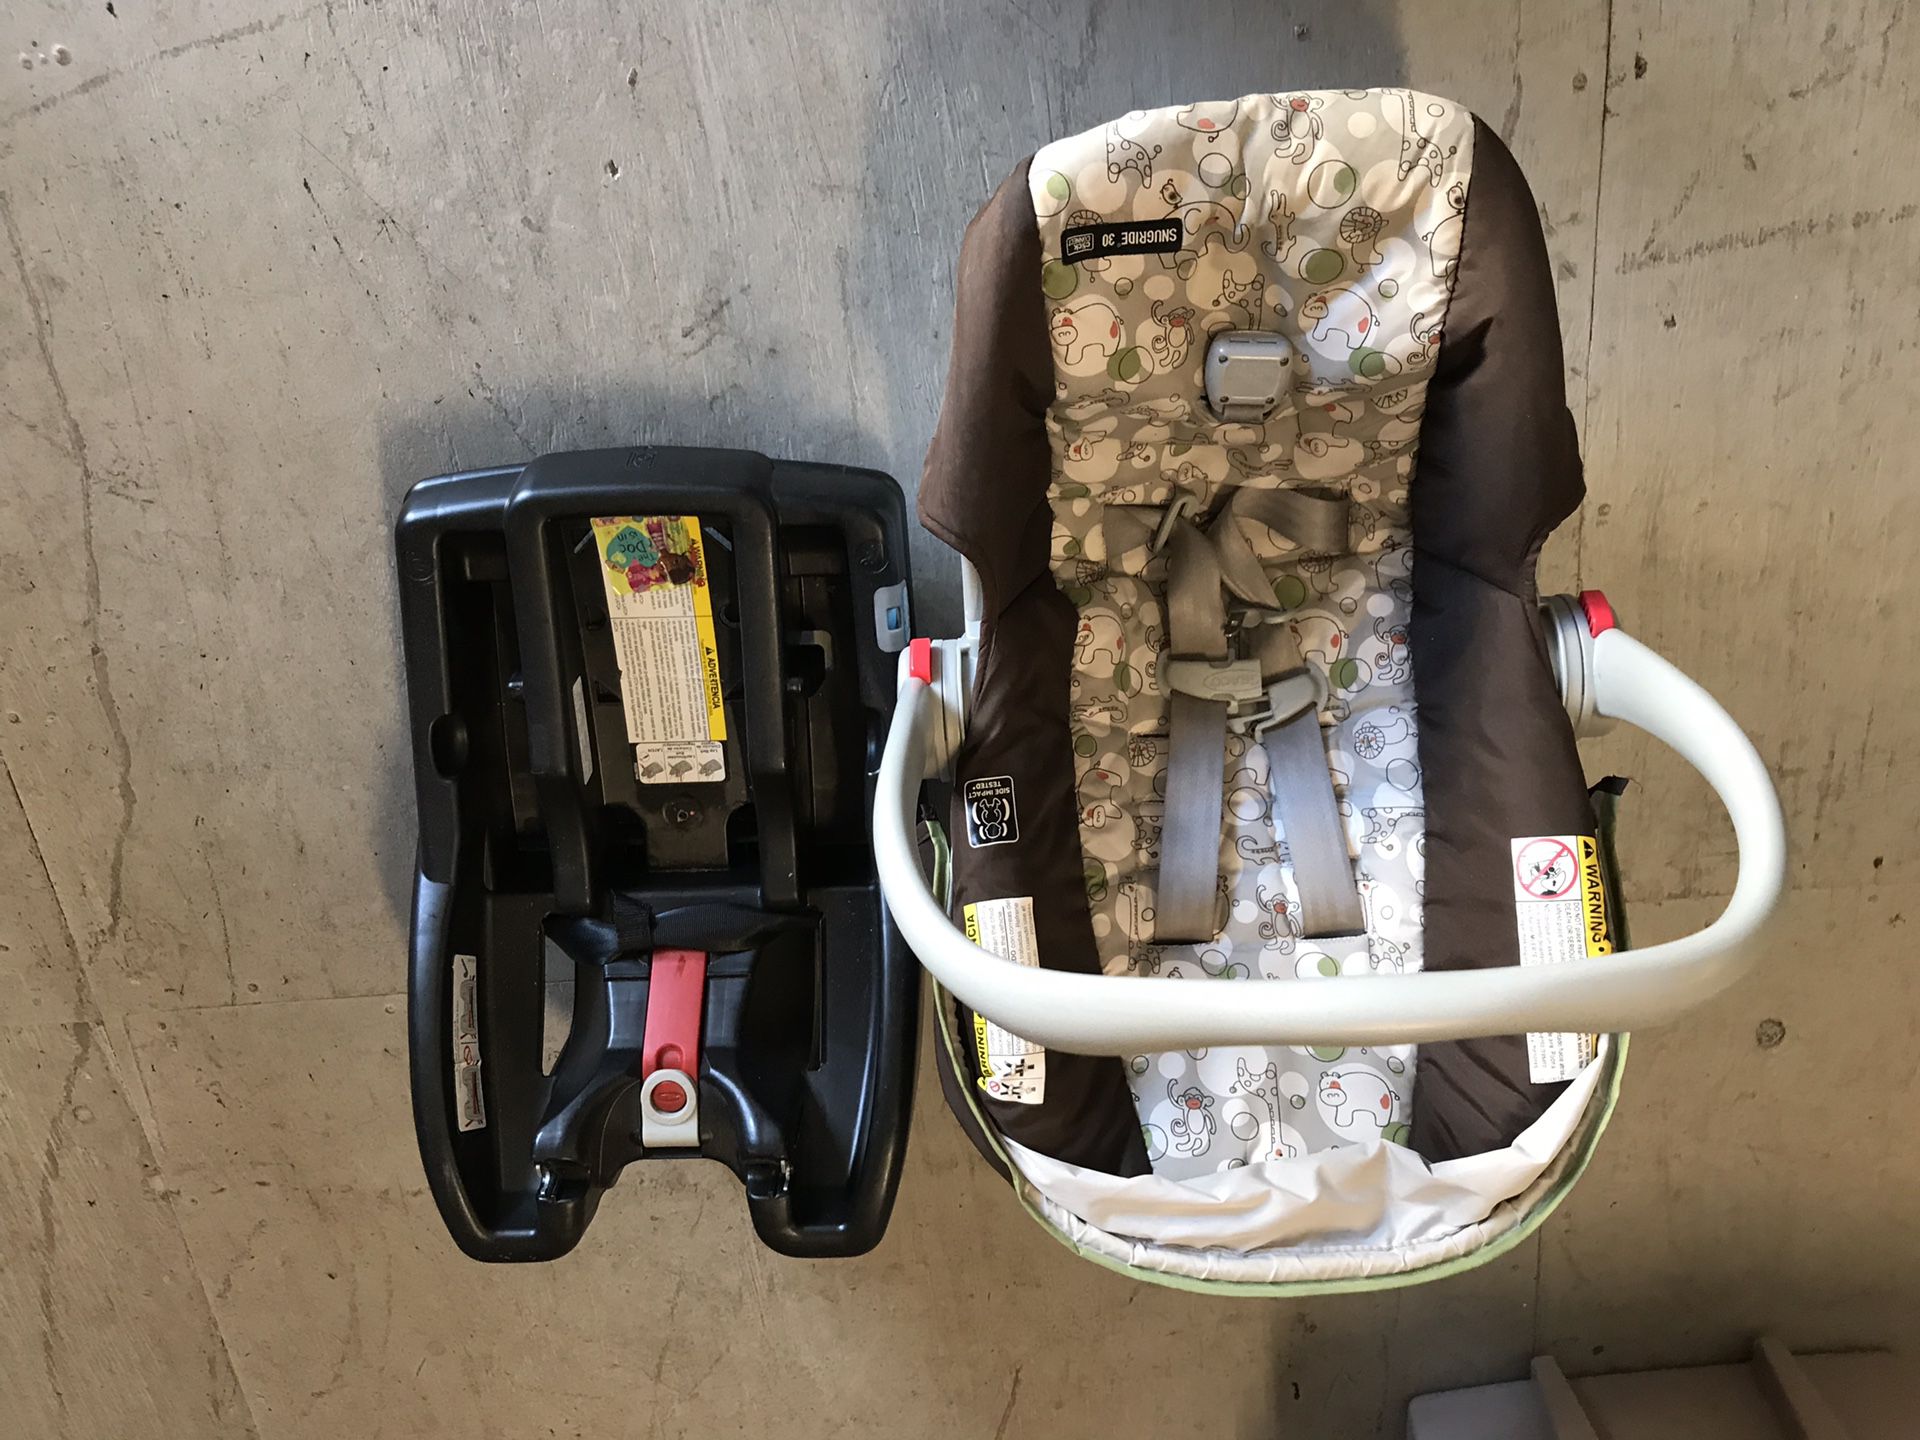 Snugride 30 graco car seat and base